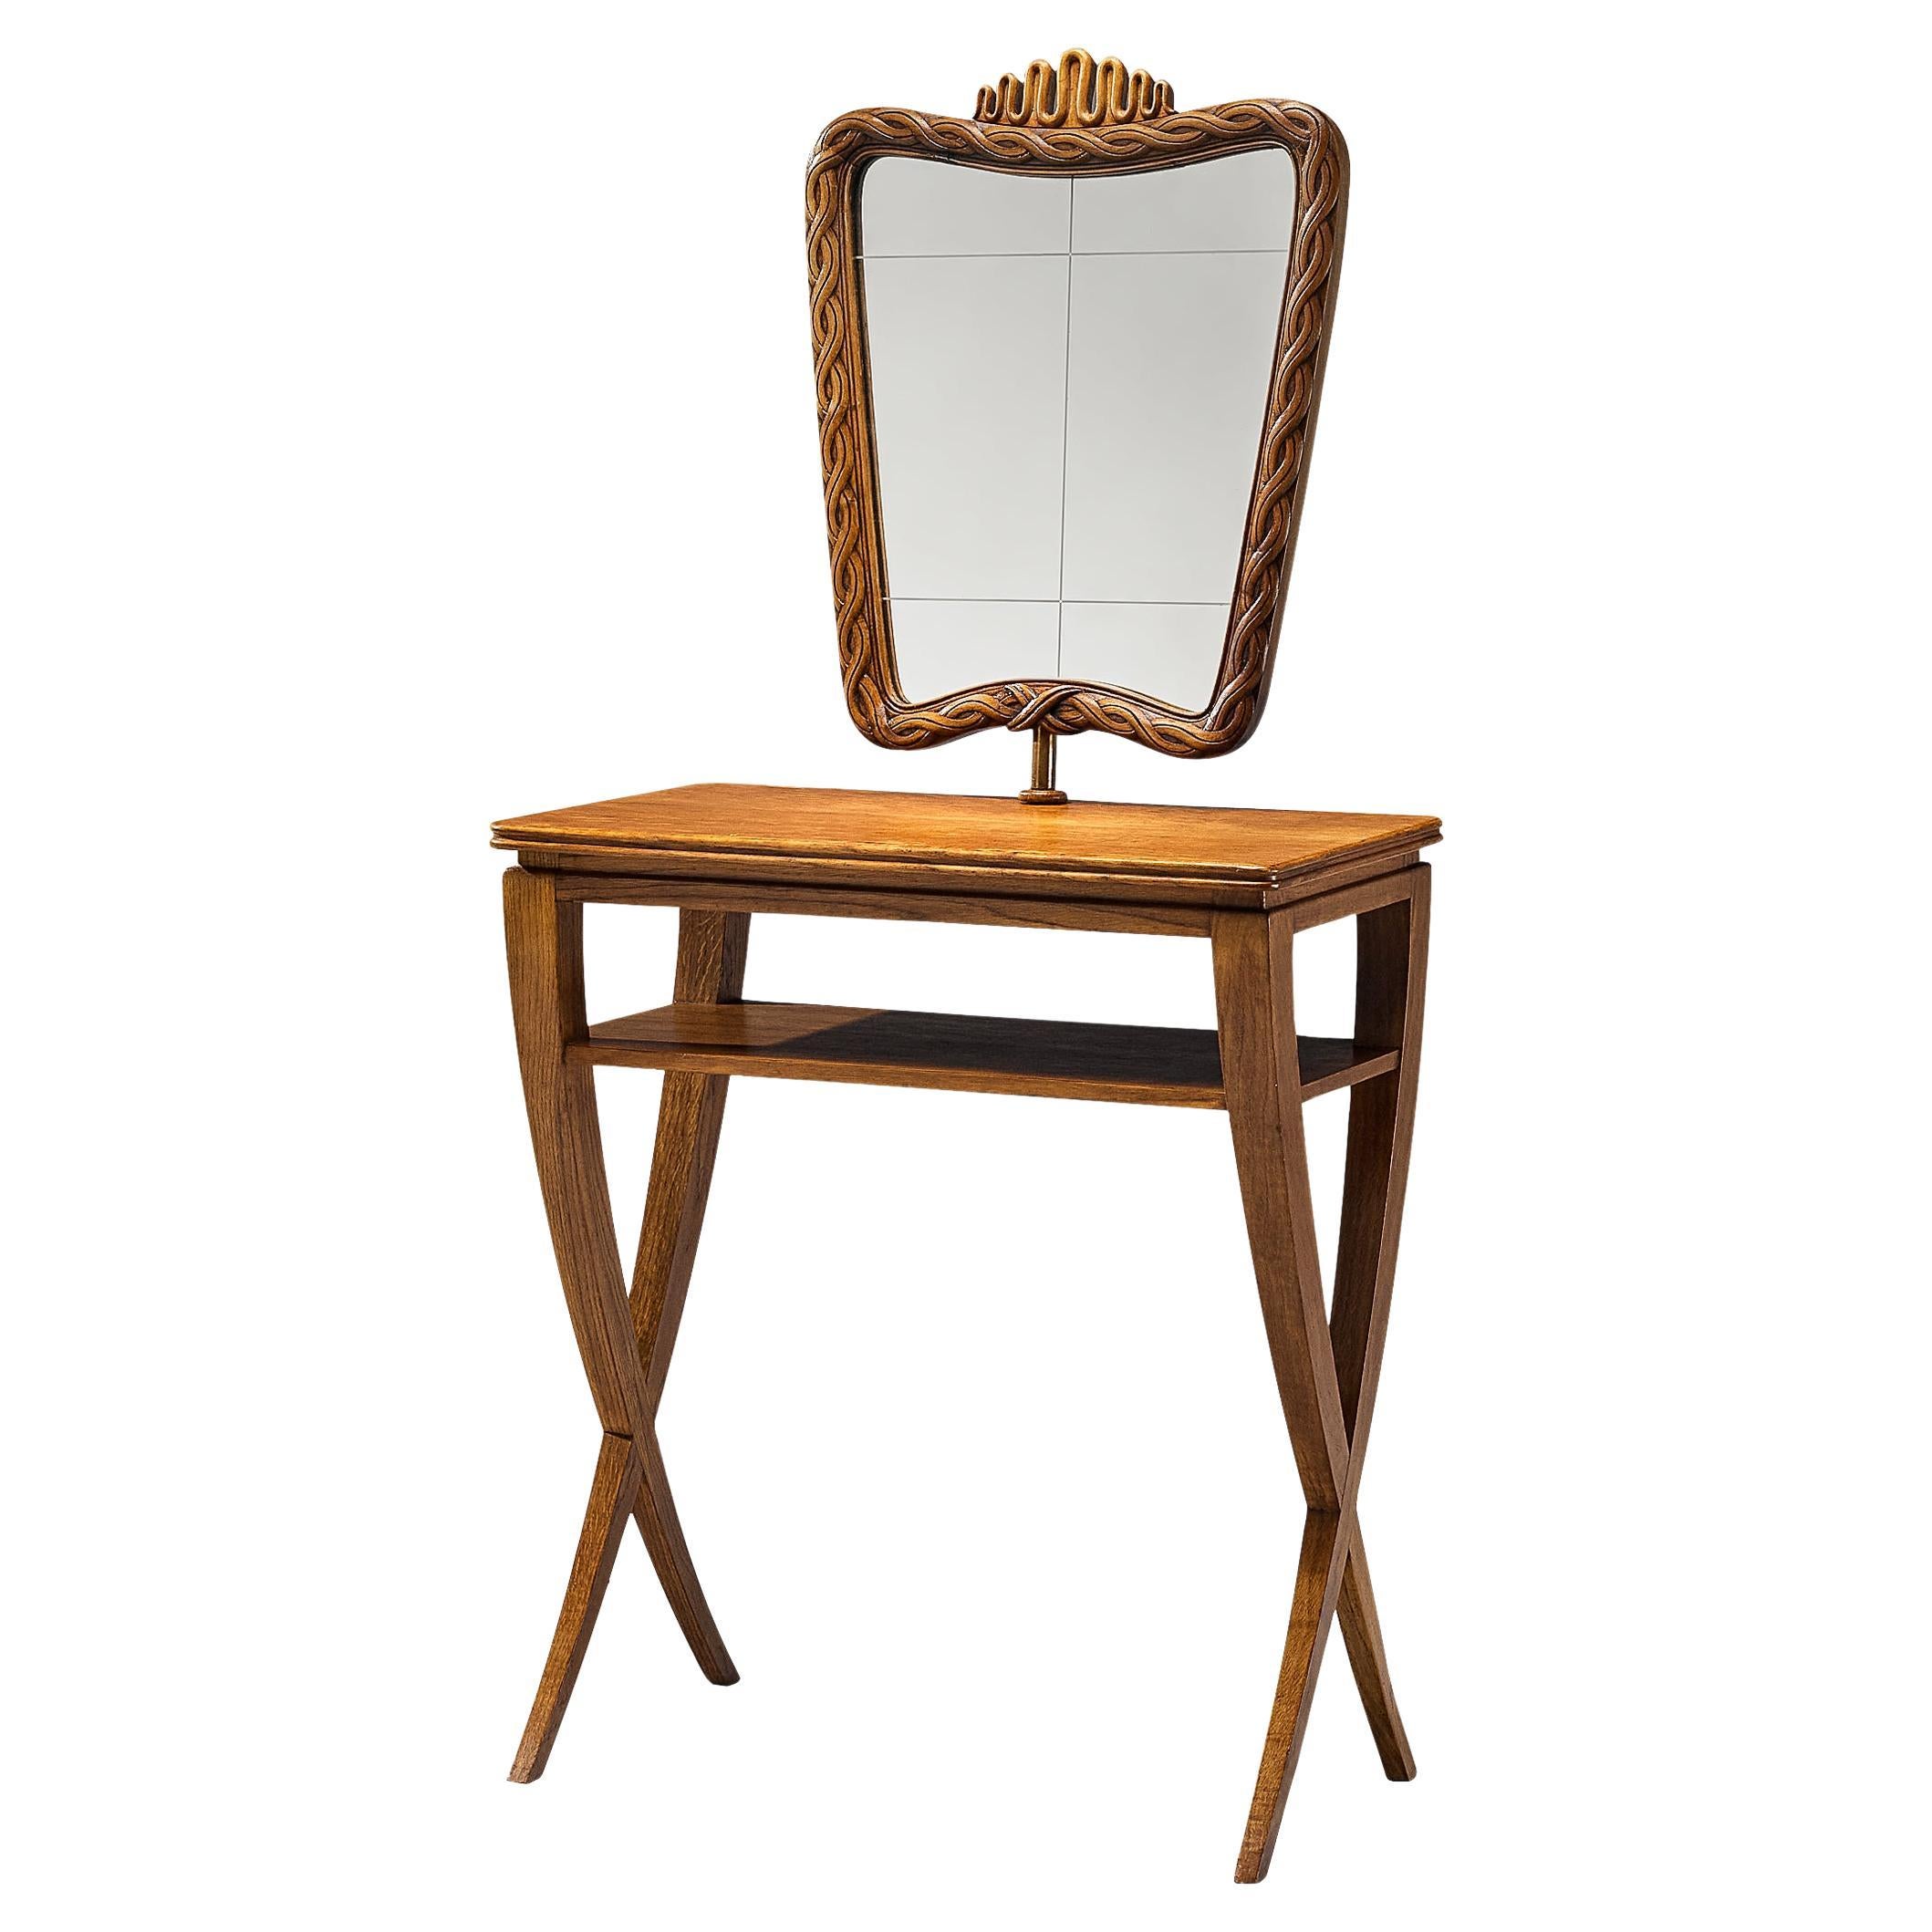 Unique Italian Vanity Table with Mirror and Carved Elements in Oak 